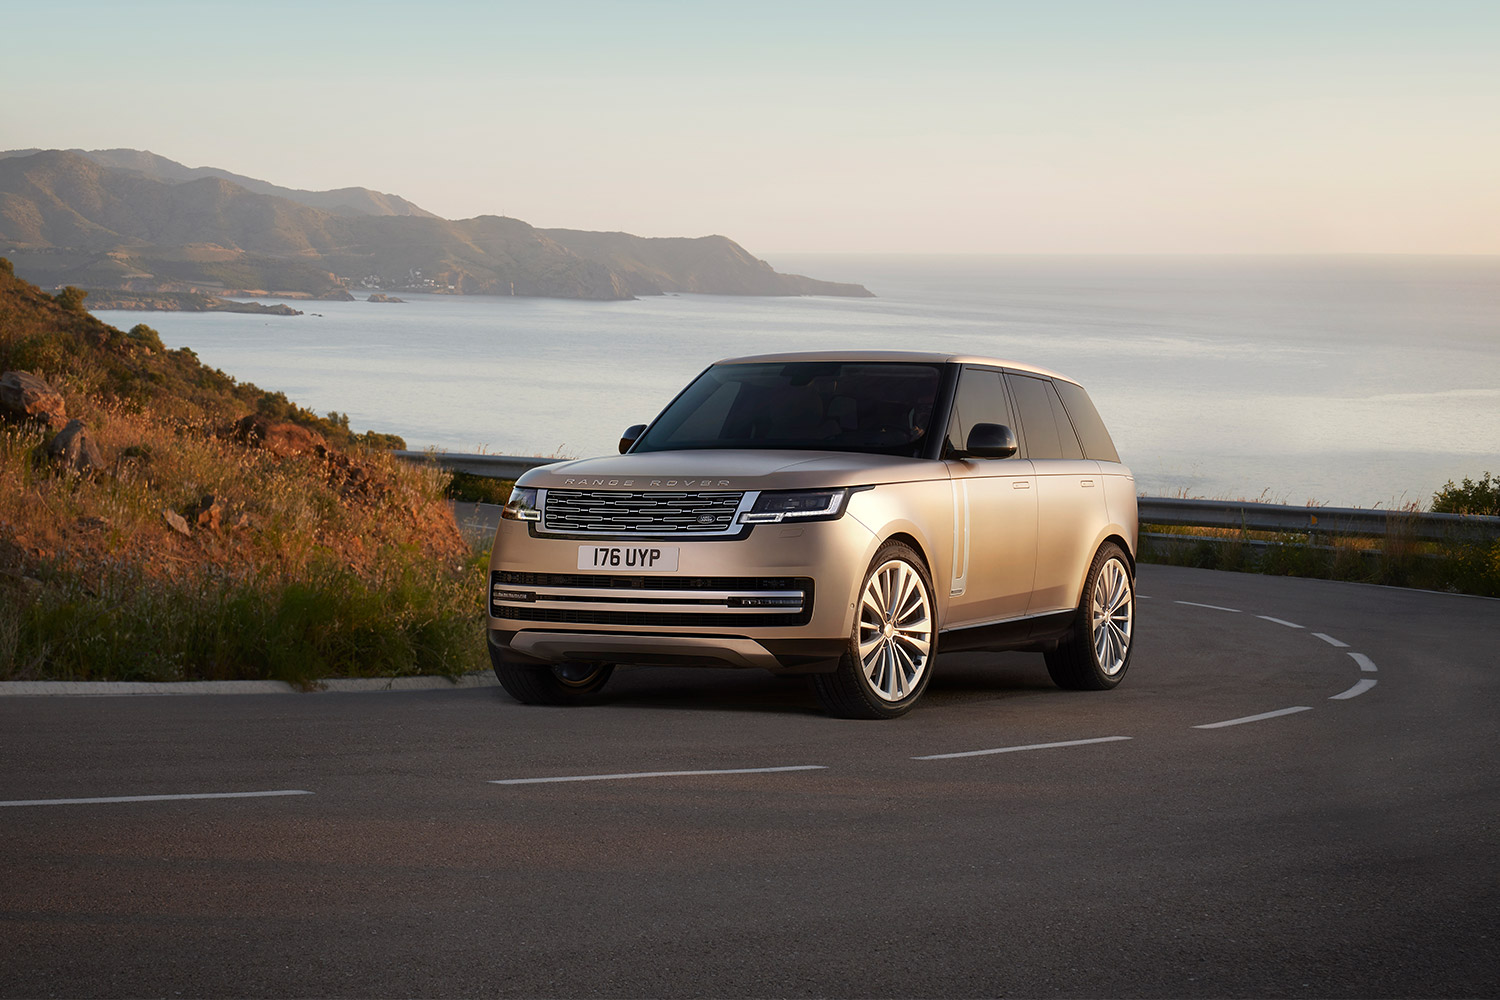 The 2023 Land Rover Range Rover SUV driving up a road next to the ocean